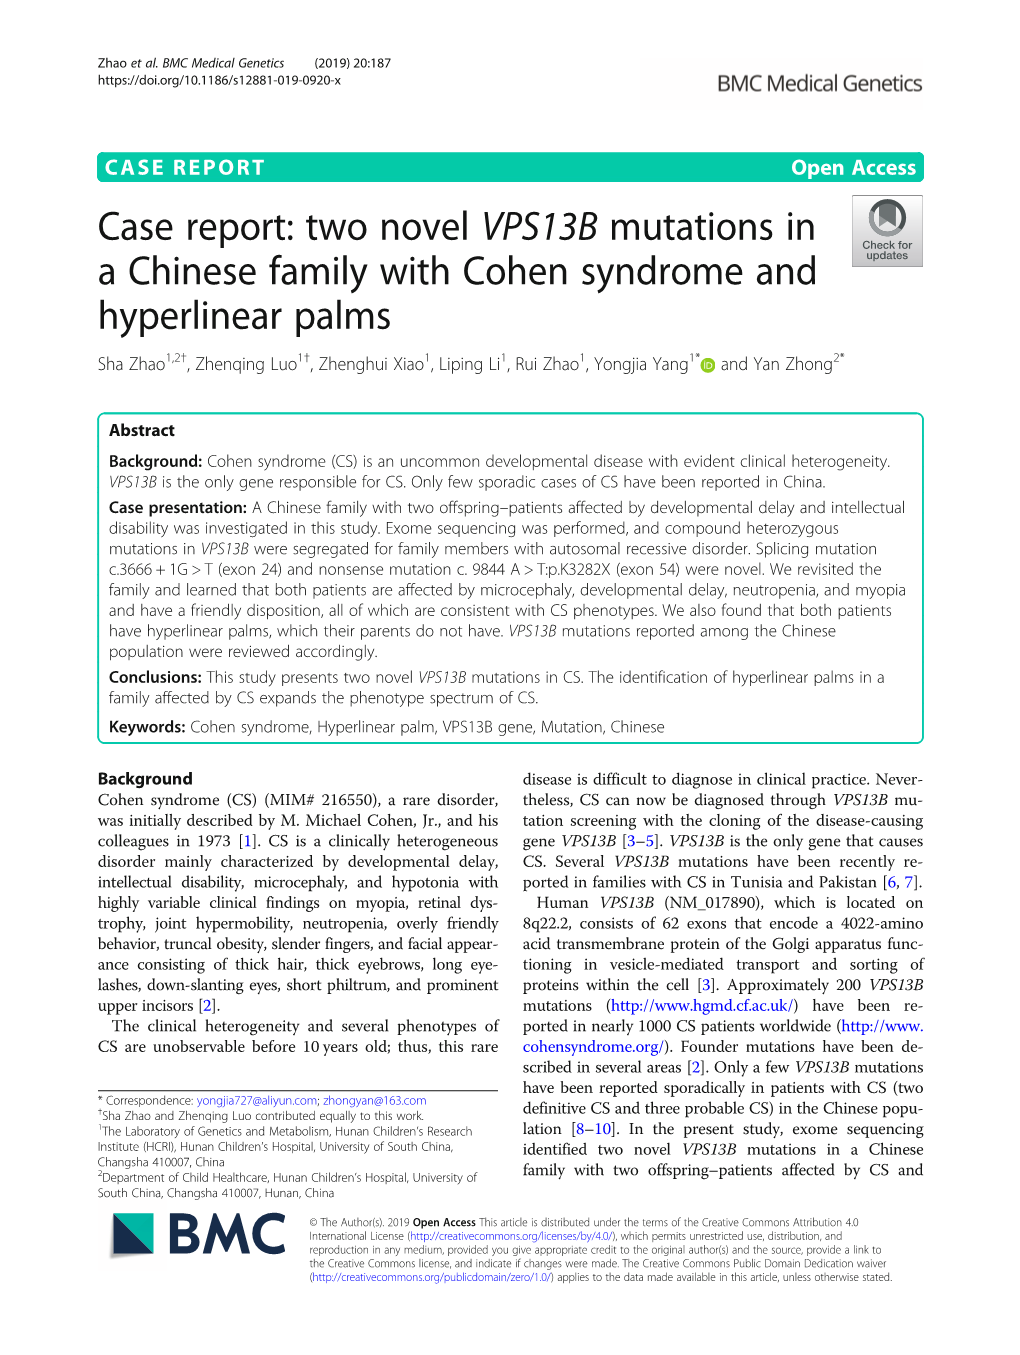 Two Novel VPS13B Mutations in a Chinese Family with Cohen